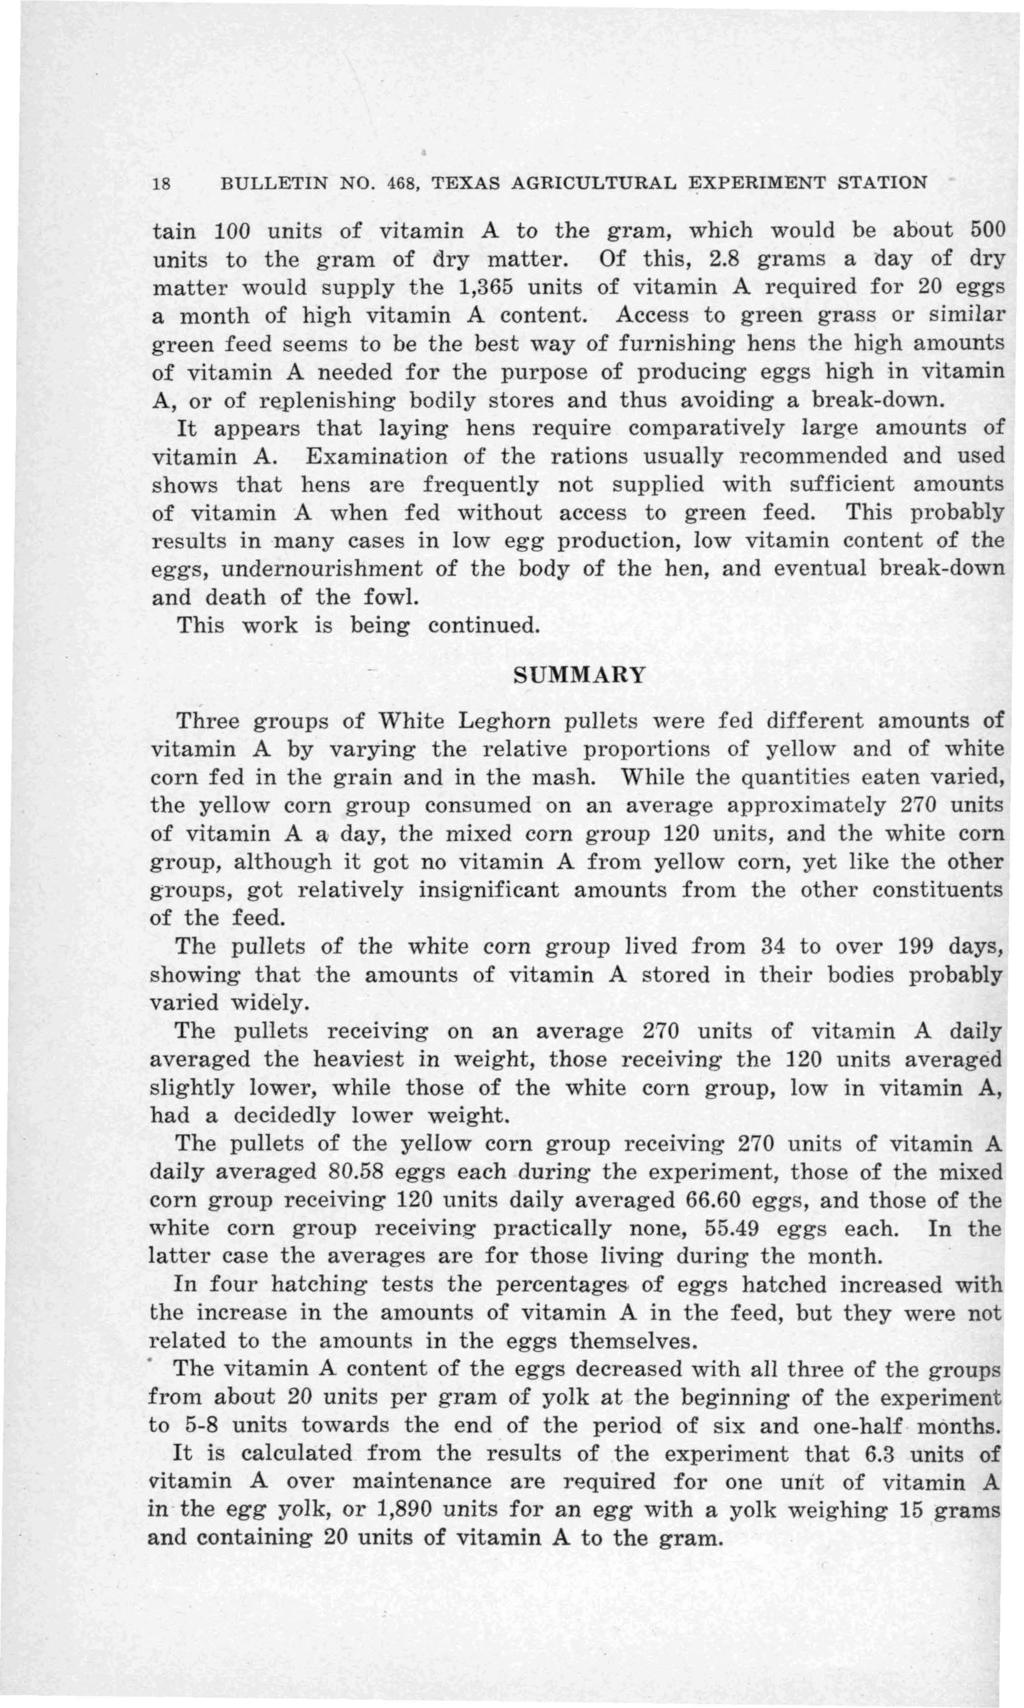 18 BULLETIN NO. 468, TEXAS AGRICULTURAL EXPERIMENT STATION tain 100 units of vitamin A to the gram, which would be about 500 units to the gram of dry matter. Of this, 2.